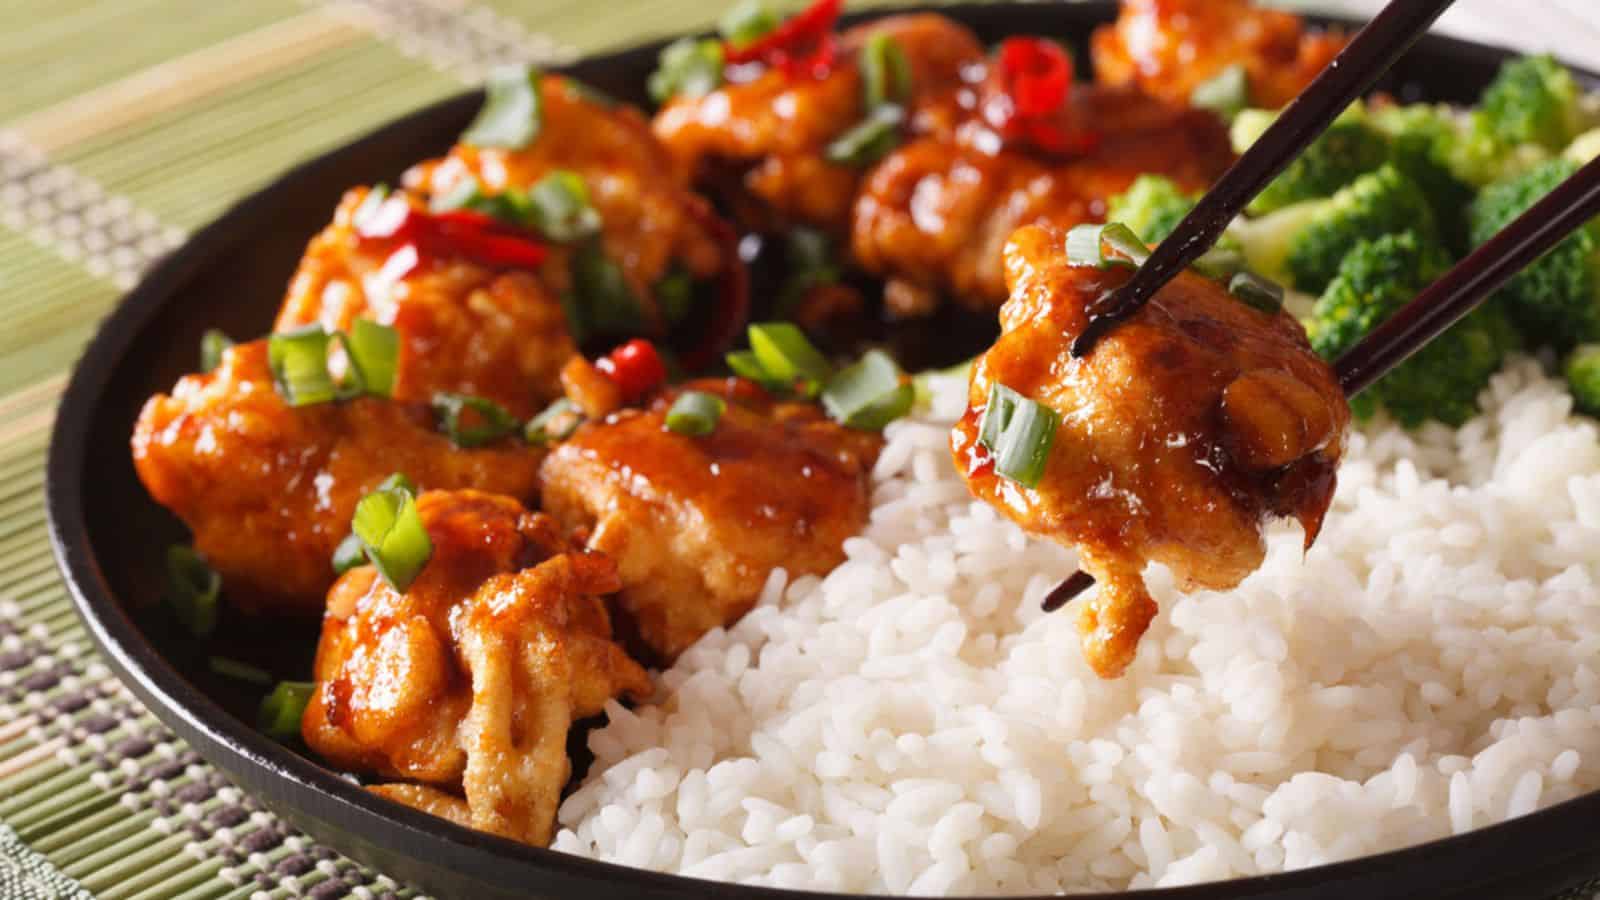 General Tso's chicken with rice for dinner. Horizontal close-up